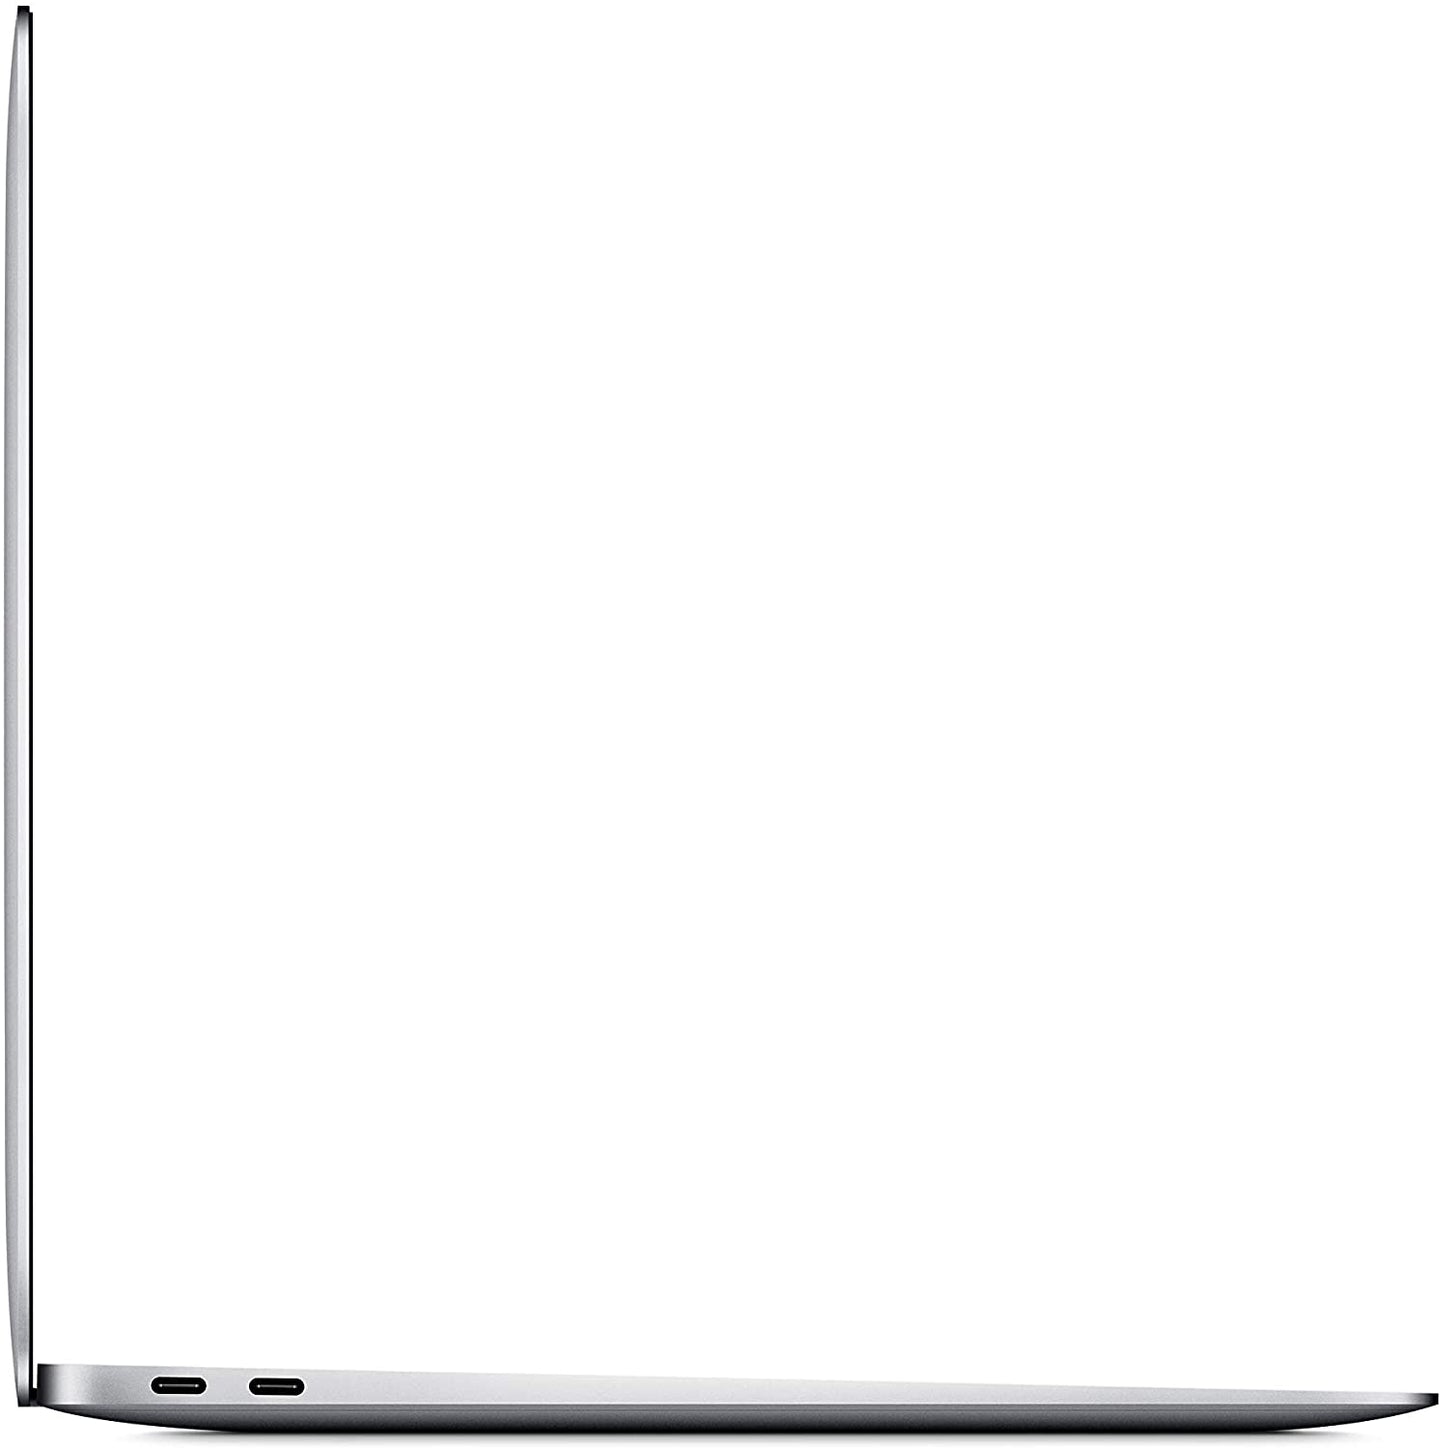 Apple Macbook Air 13-Inch, M1 Chip with 8-Core Processor and 7-core Graphics/8GB RAM/256GB SSD - Silver